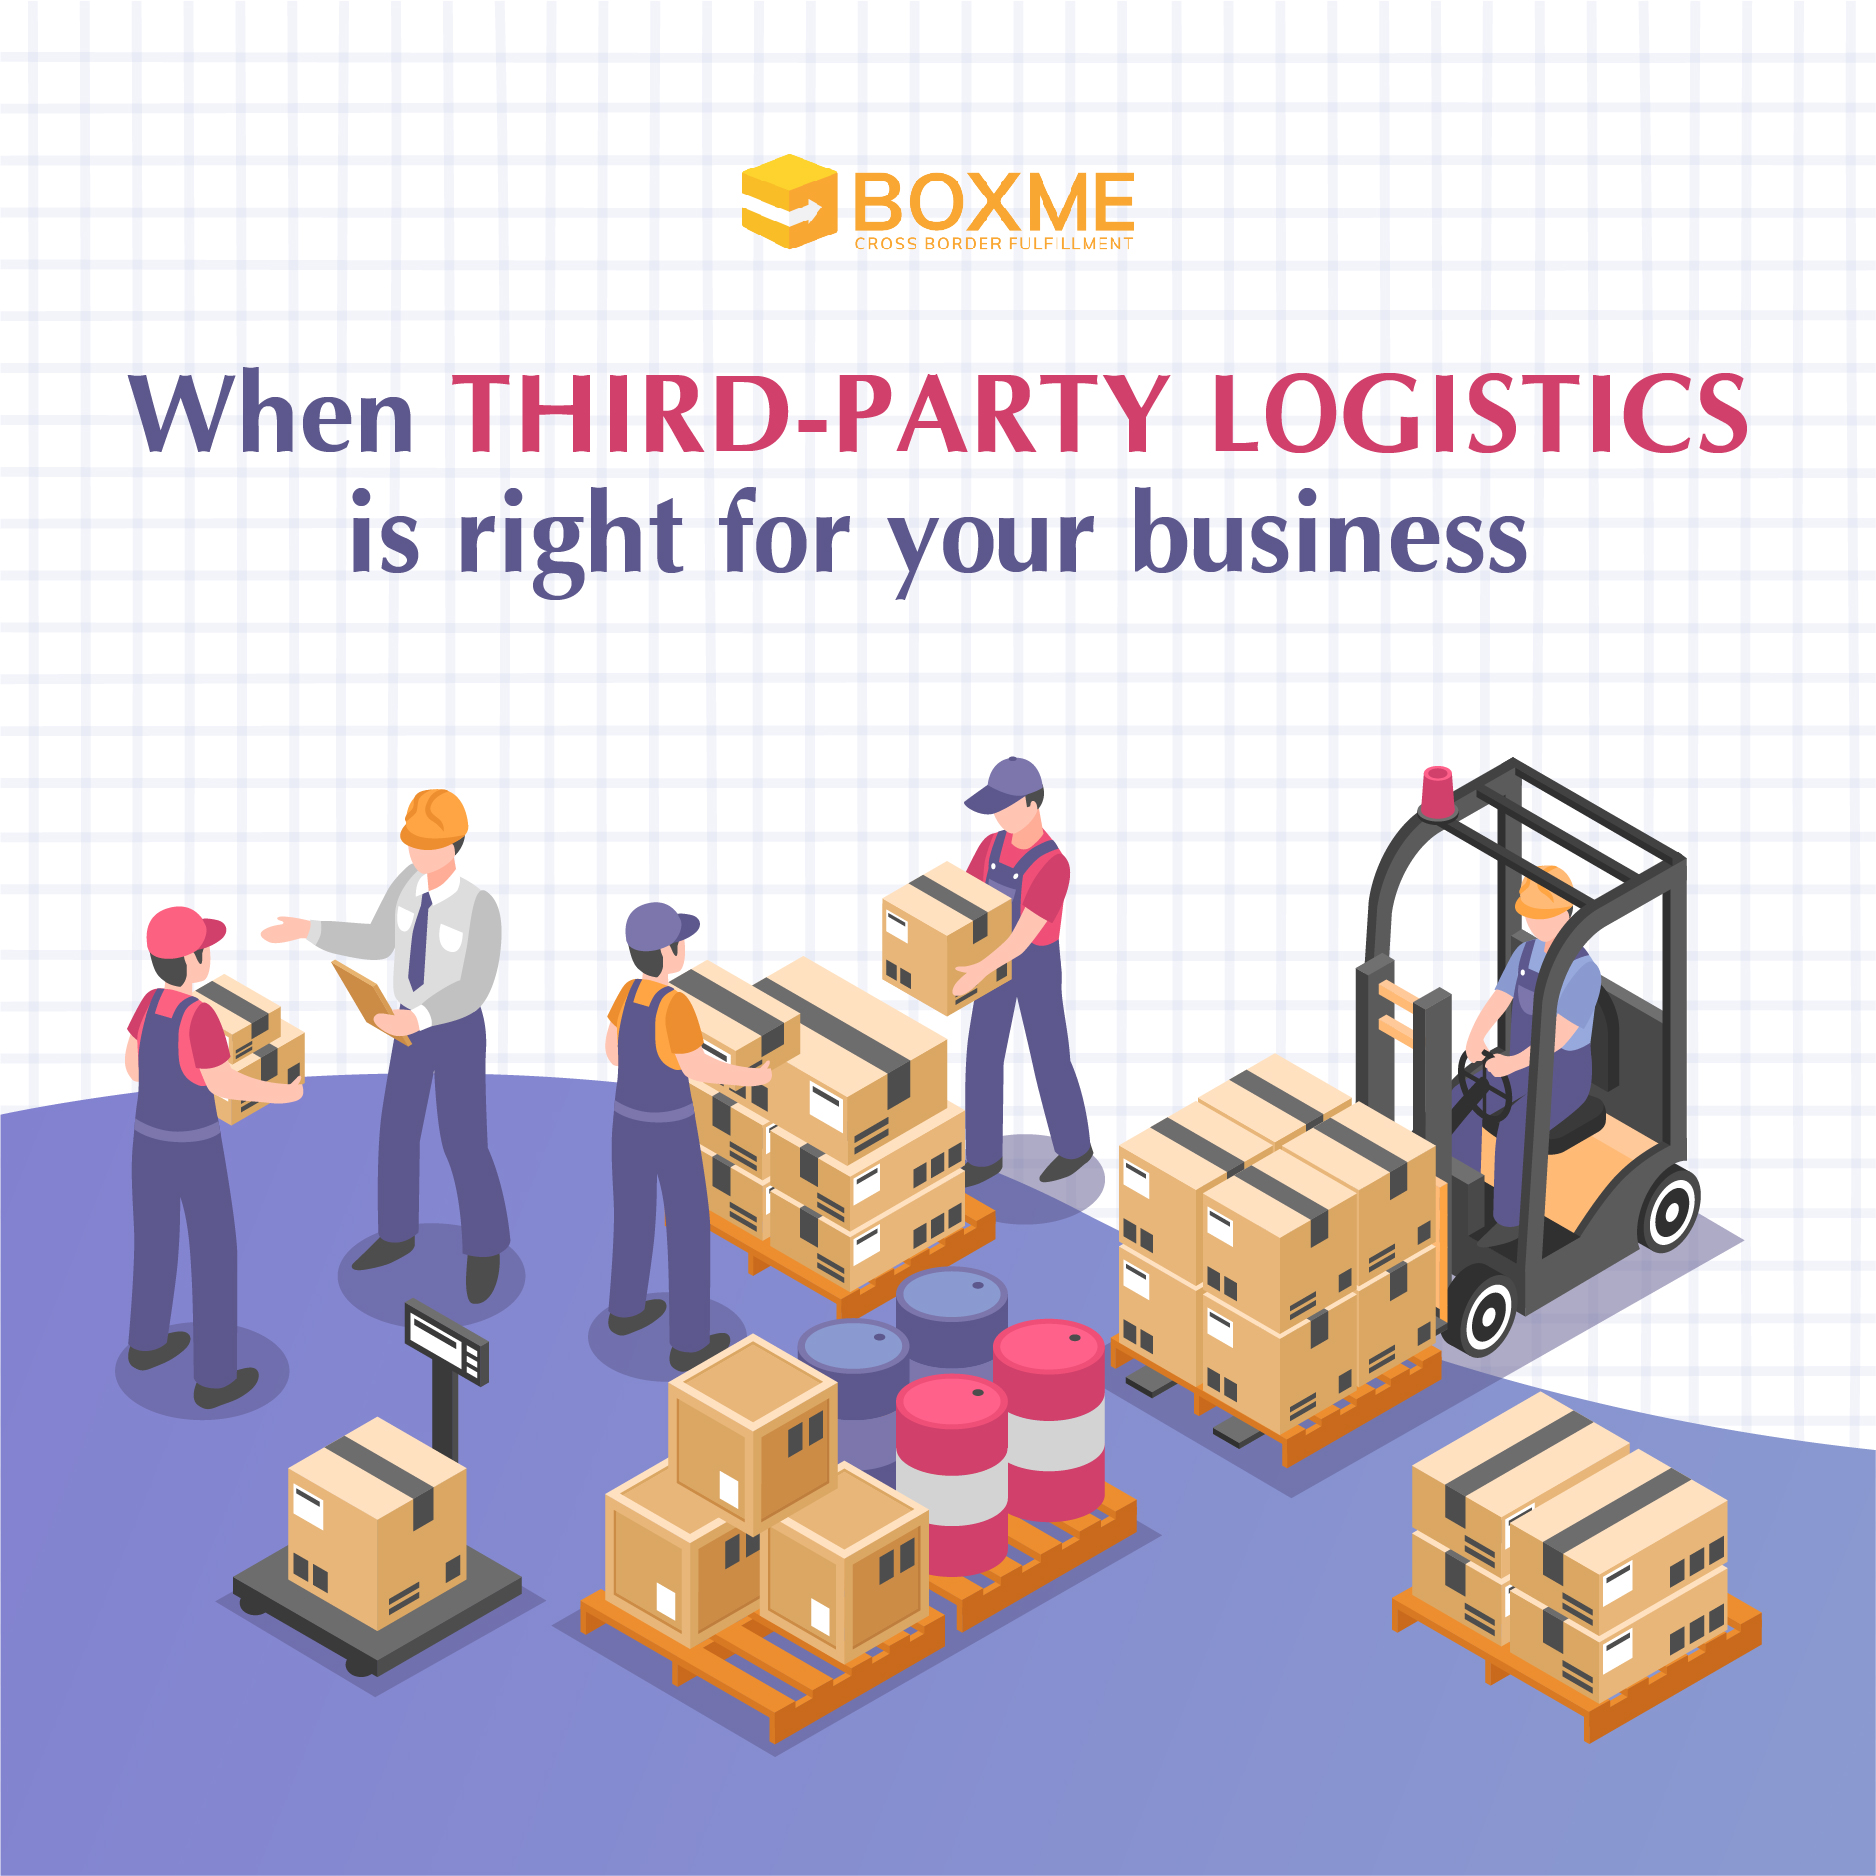 When thirdparty logistics is right for your business